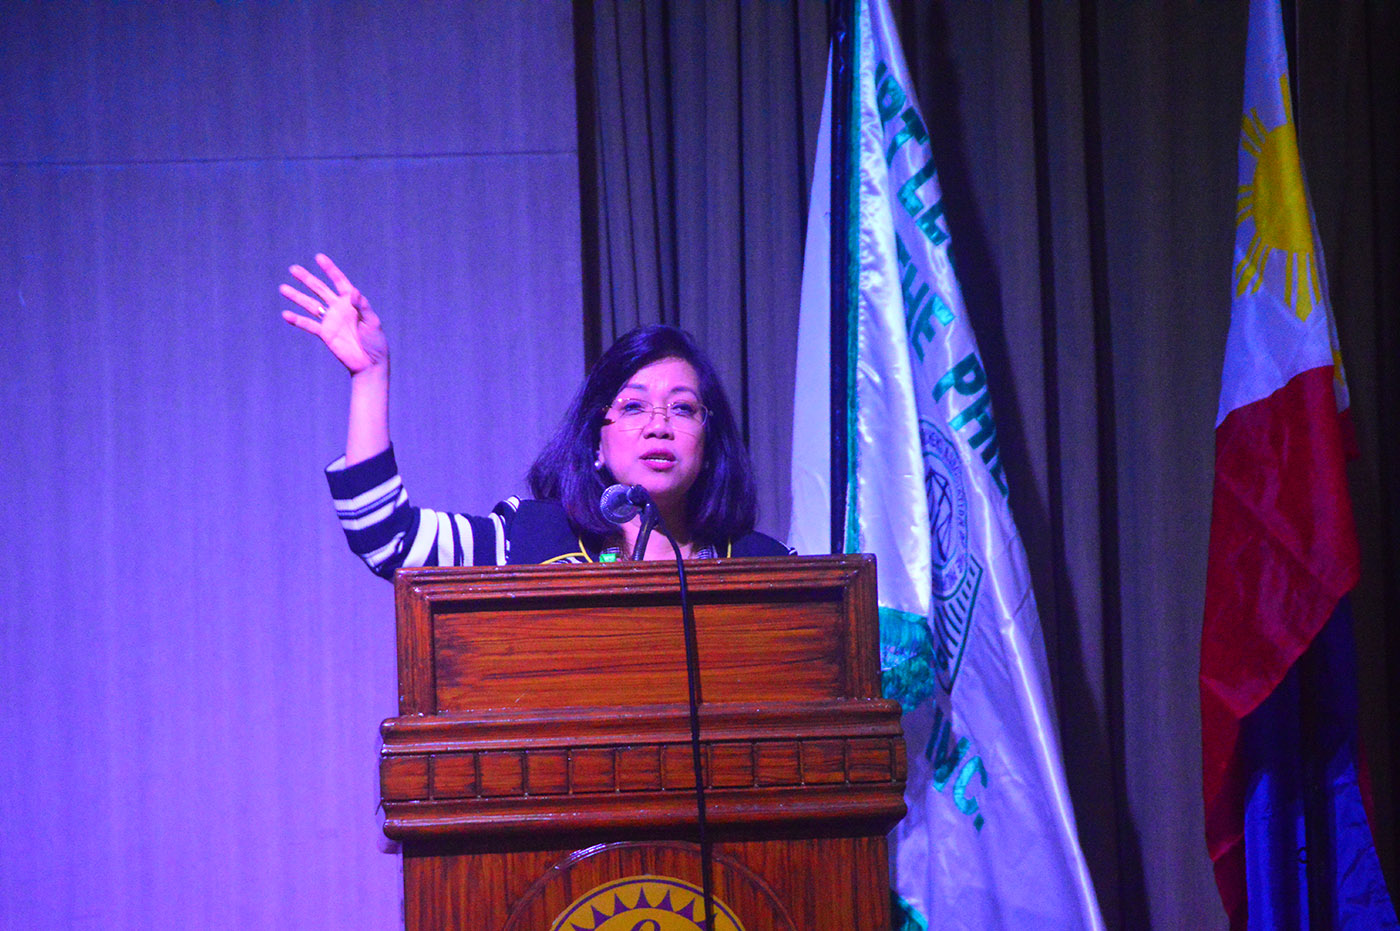 INTEGRITY. Chief Justice Maria Lourdes Sereno tells the Supreme Court that the Statement of Assets, Liabilities, and Net Worth is not a requirement of integrity, during oral arguments on April 10, 2018. File photo by Marchel Espina/Rappler 